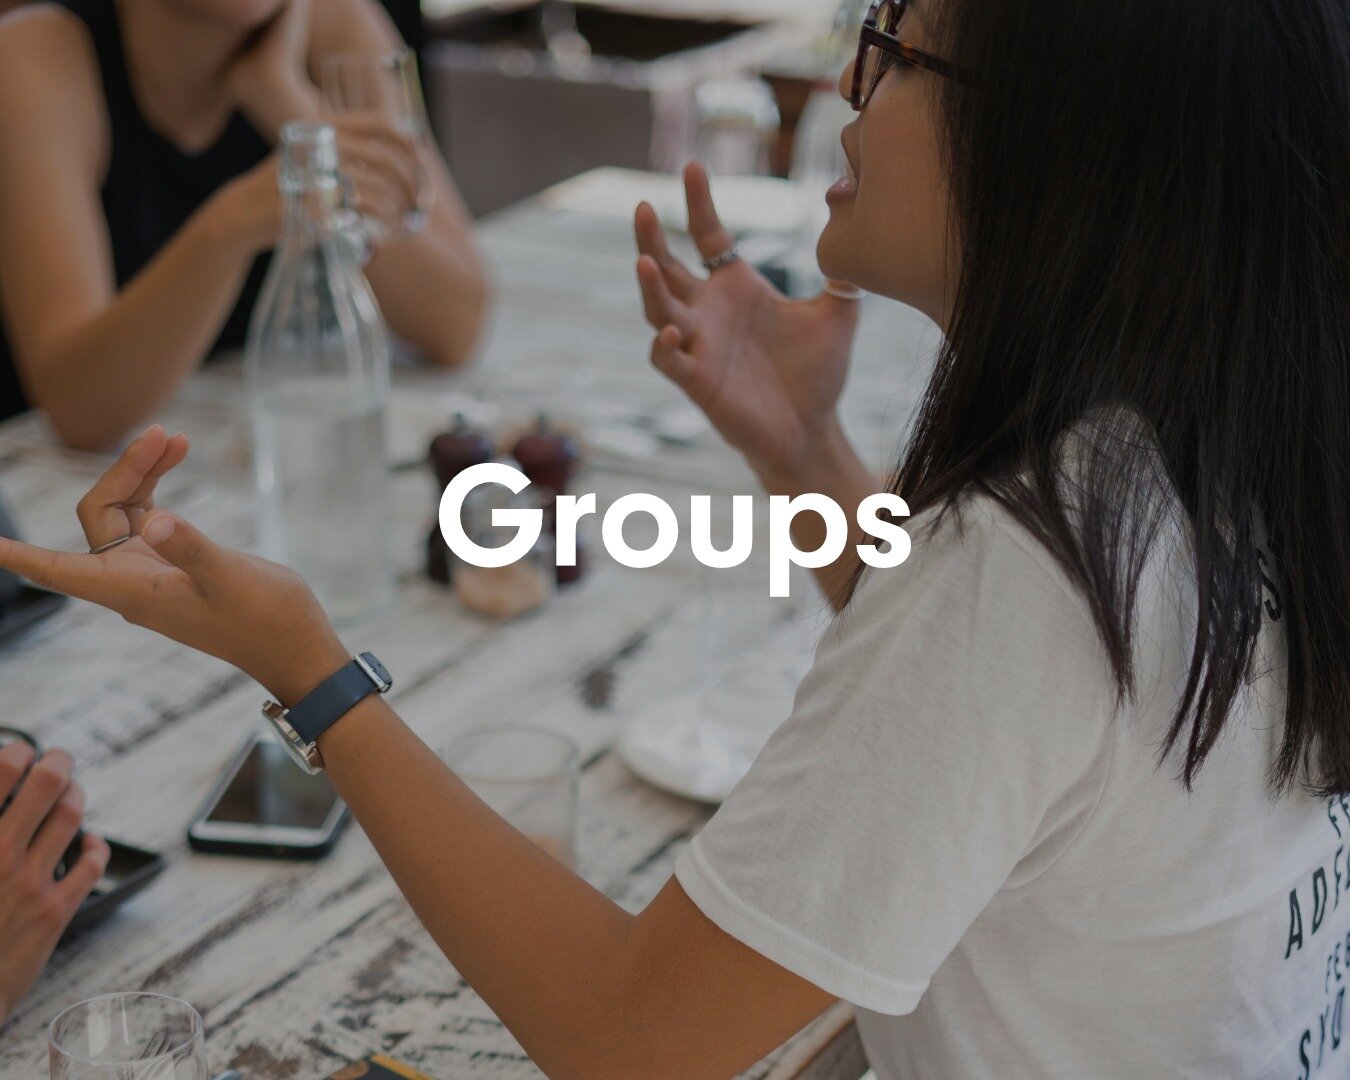 Groups are midweek spaces for belonging in community, and growing in faith.

We're excited to be launching them this week 🥳 Head to the link in our bio to find out more, and sign up to get the full address or zoom info.